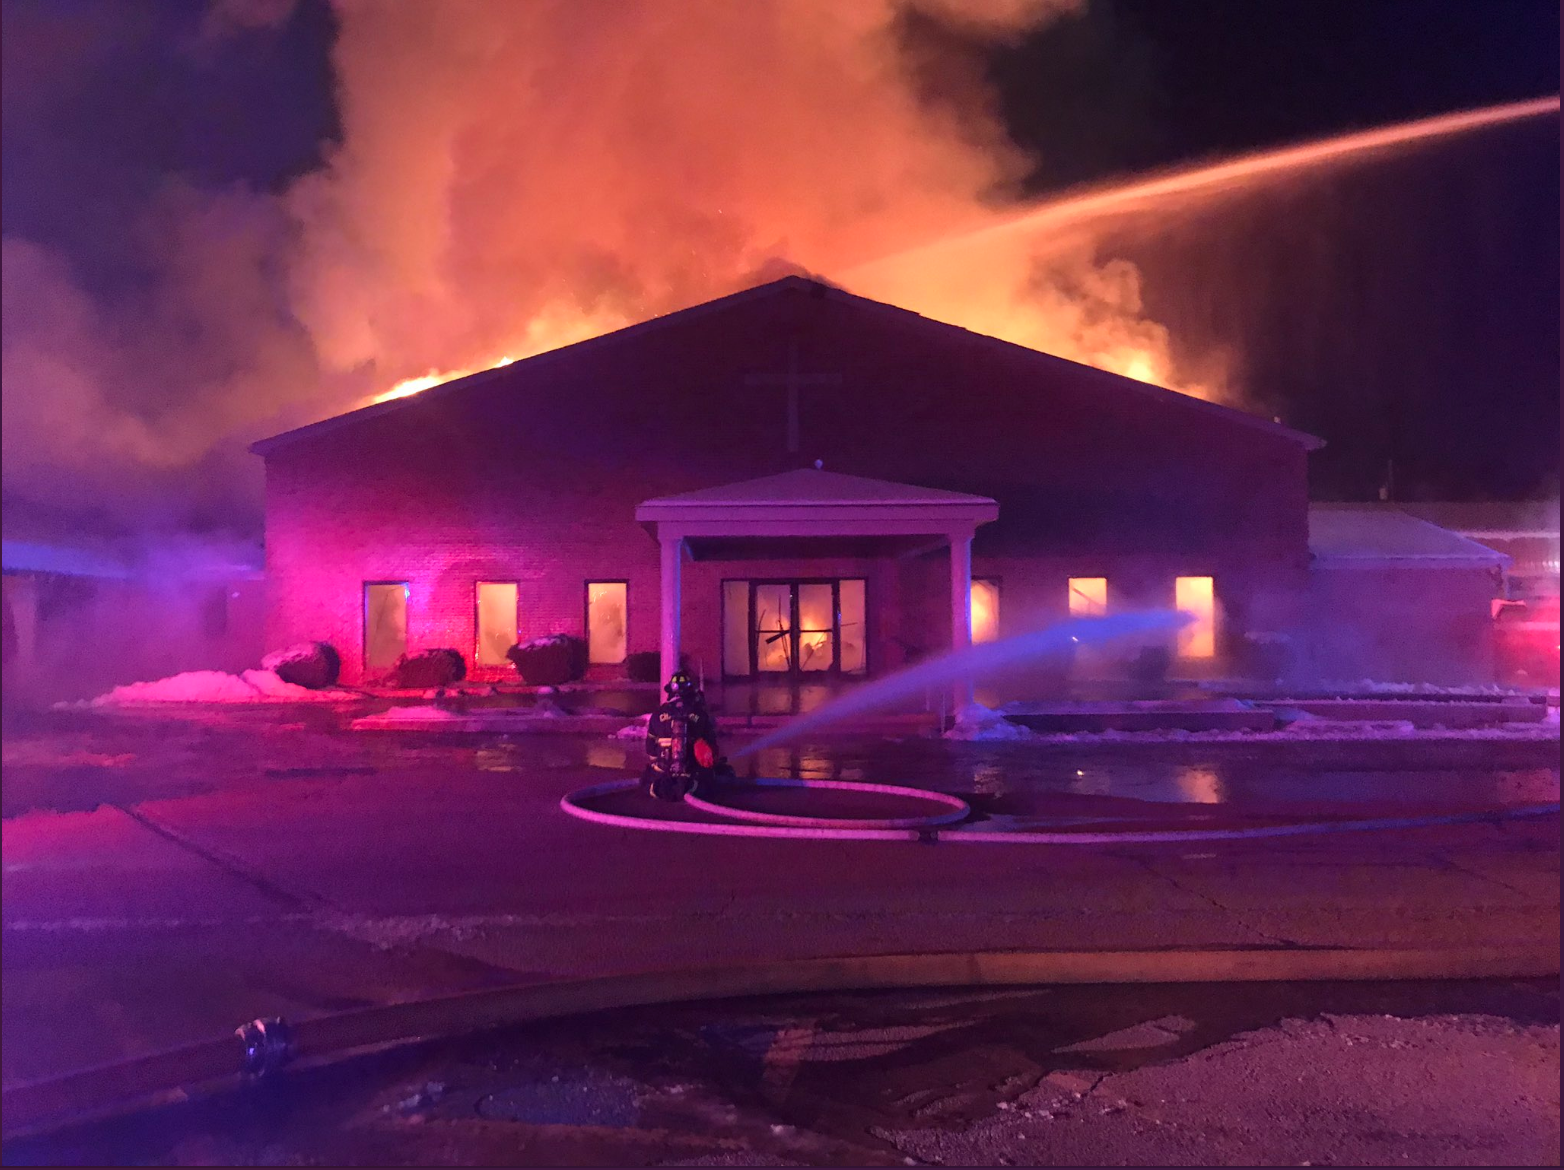 Reflecting on Mount Olive Missionary Baptist Church after Monday’s devastating fire